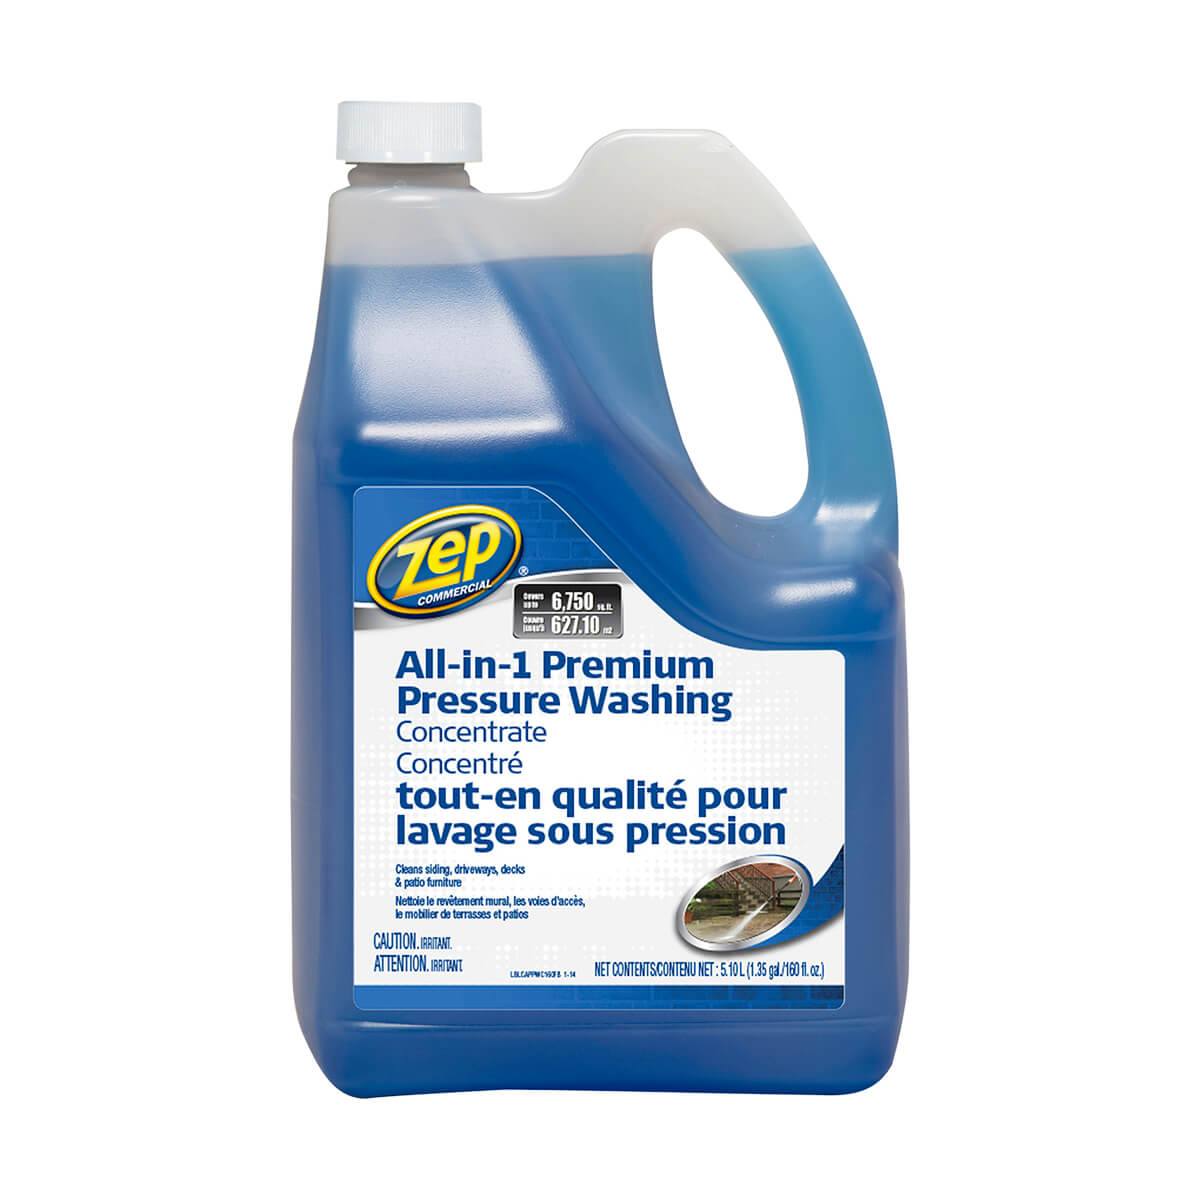 Zep Commercial All-in-One Pressure Wash Concentrate - 5.1 L